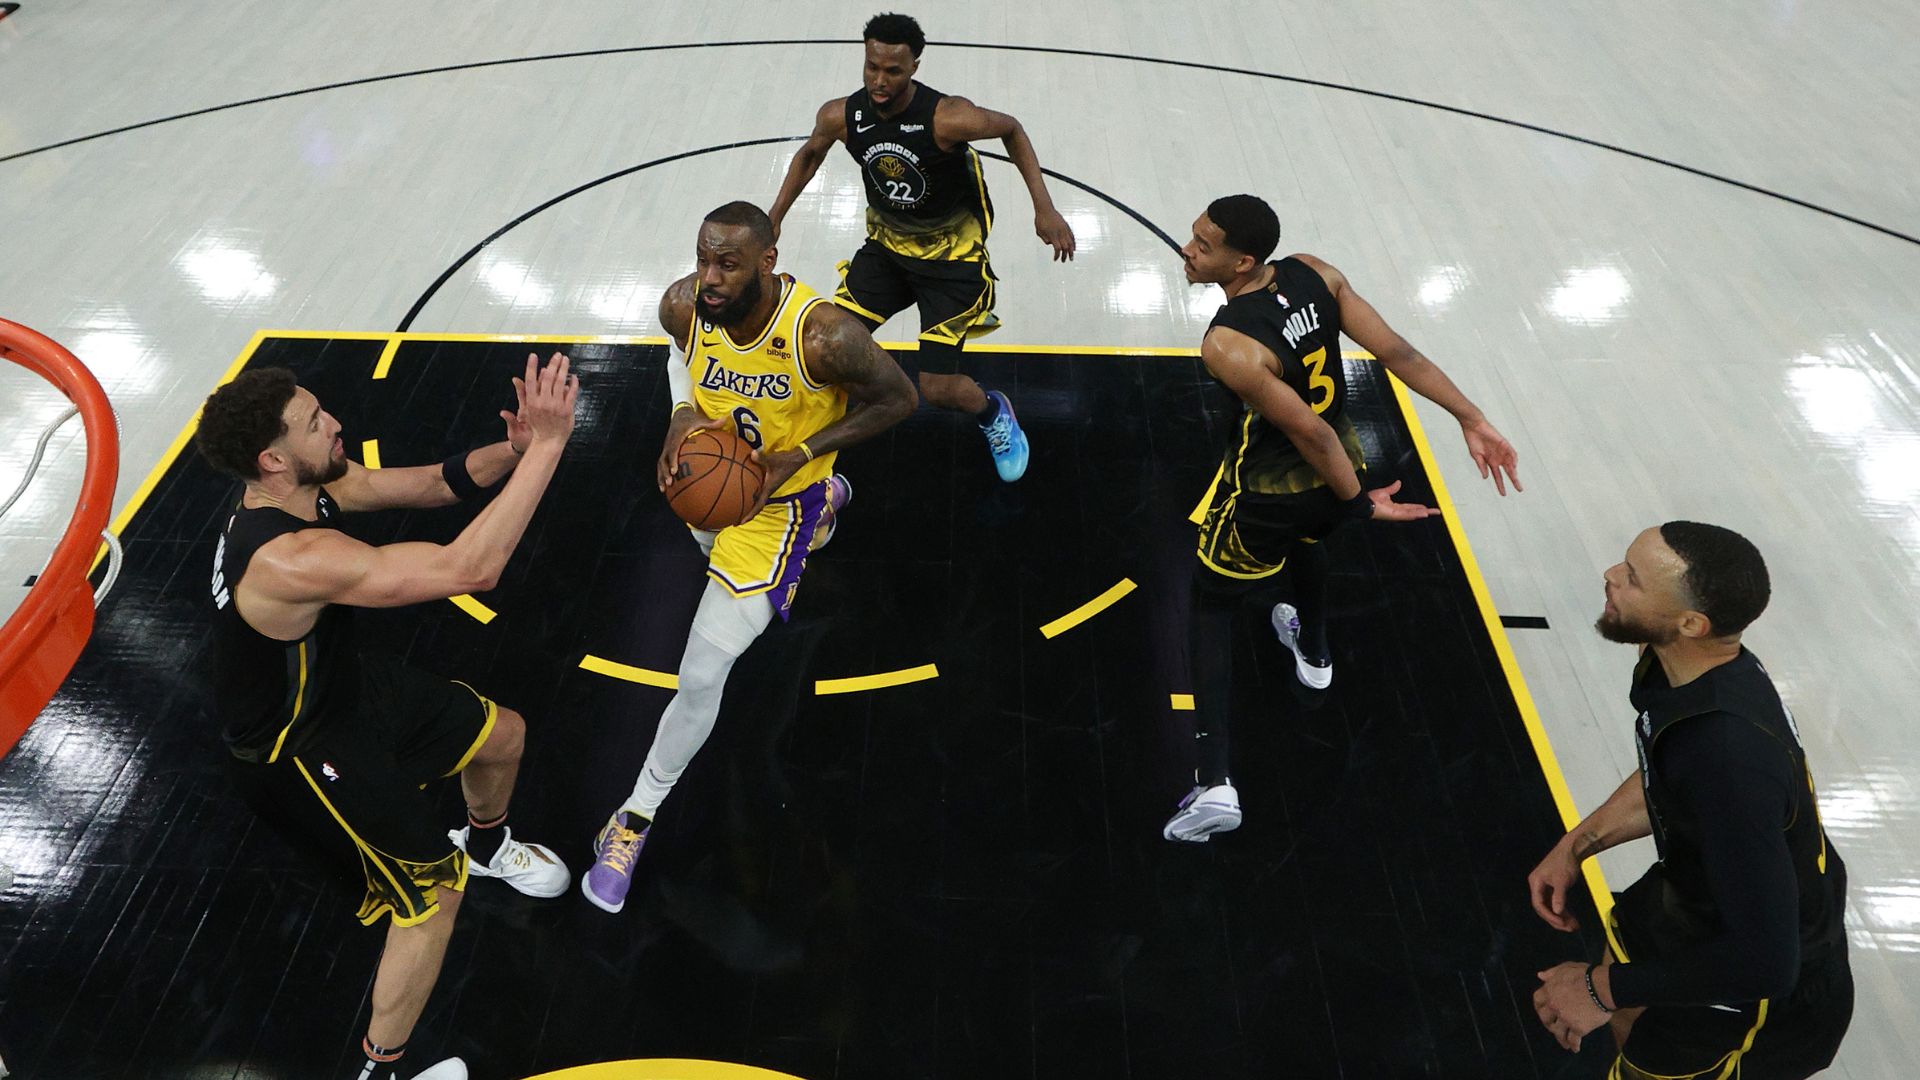 NBA PLAYOFFS AO VIVO - GOLDEN STATE WARRIORS x LOS ANGELES LAKERS